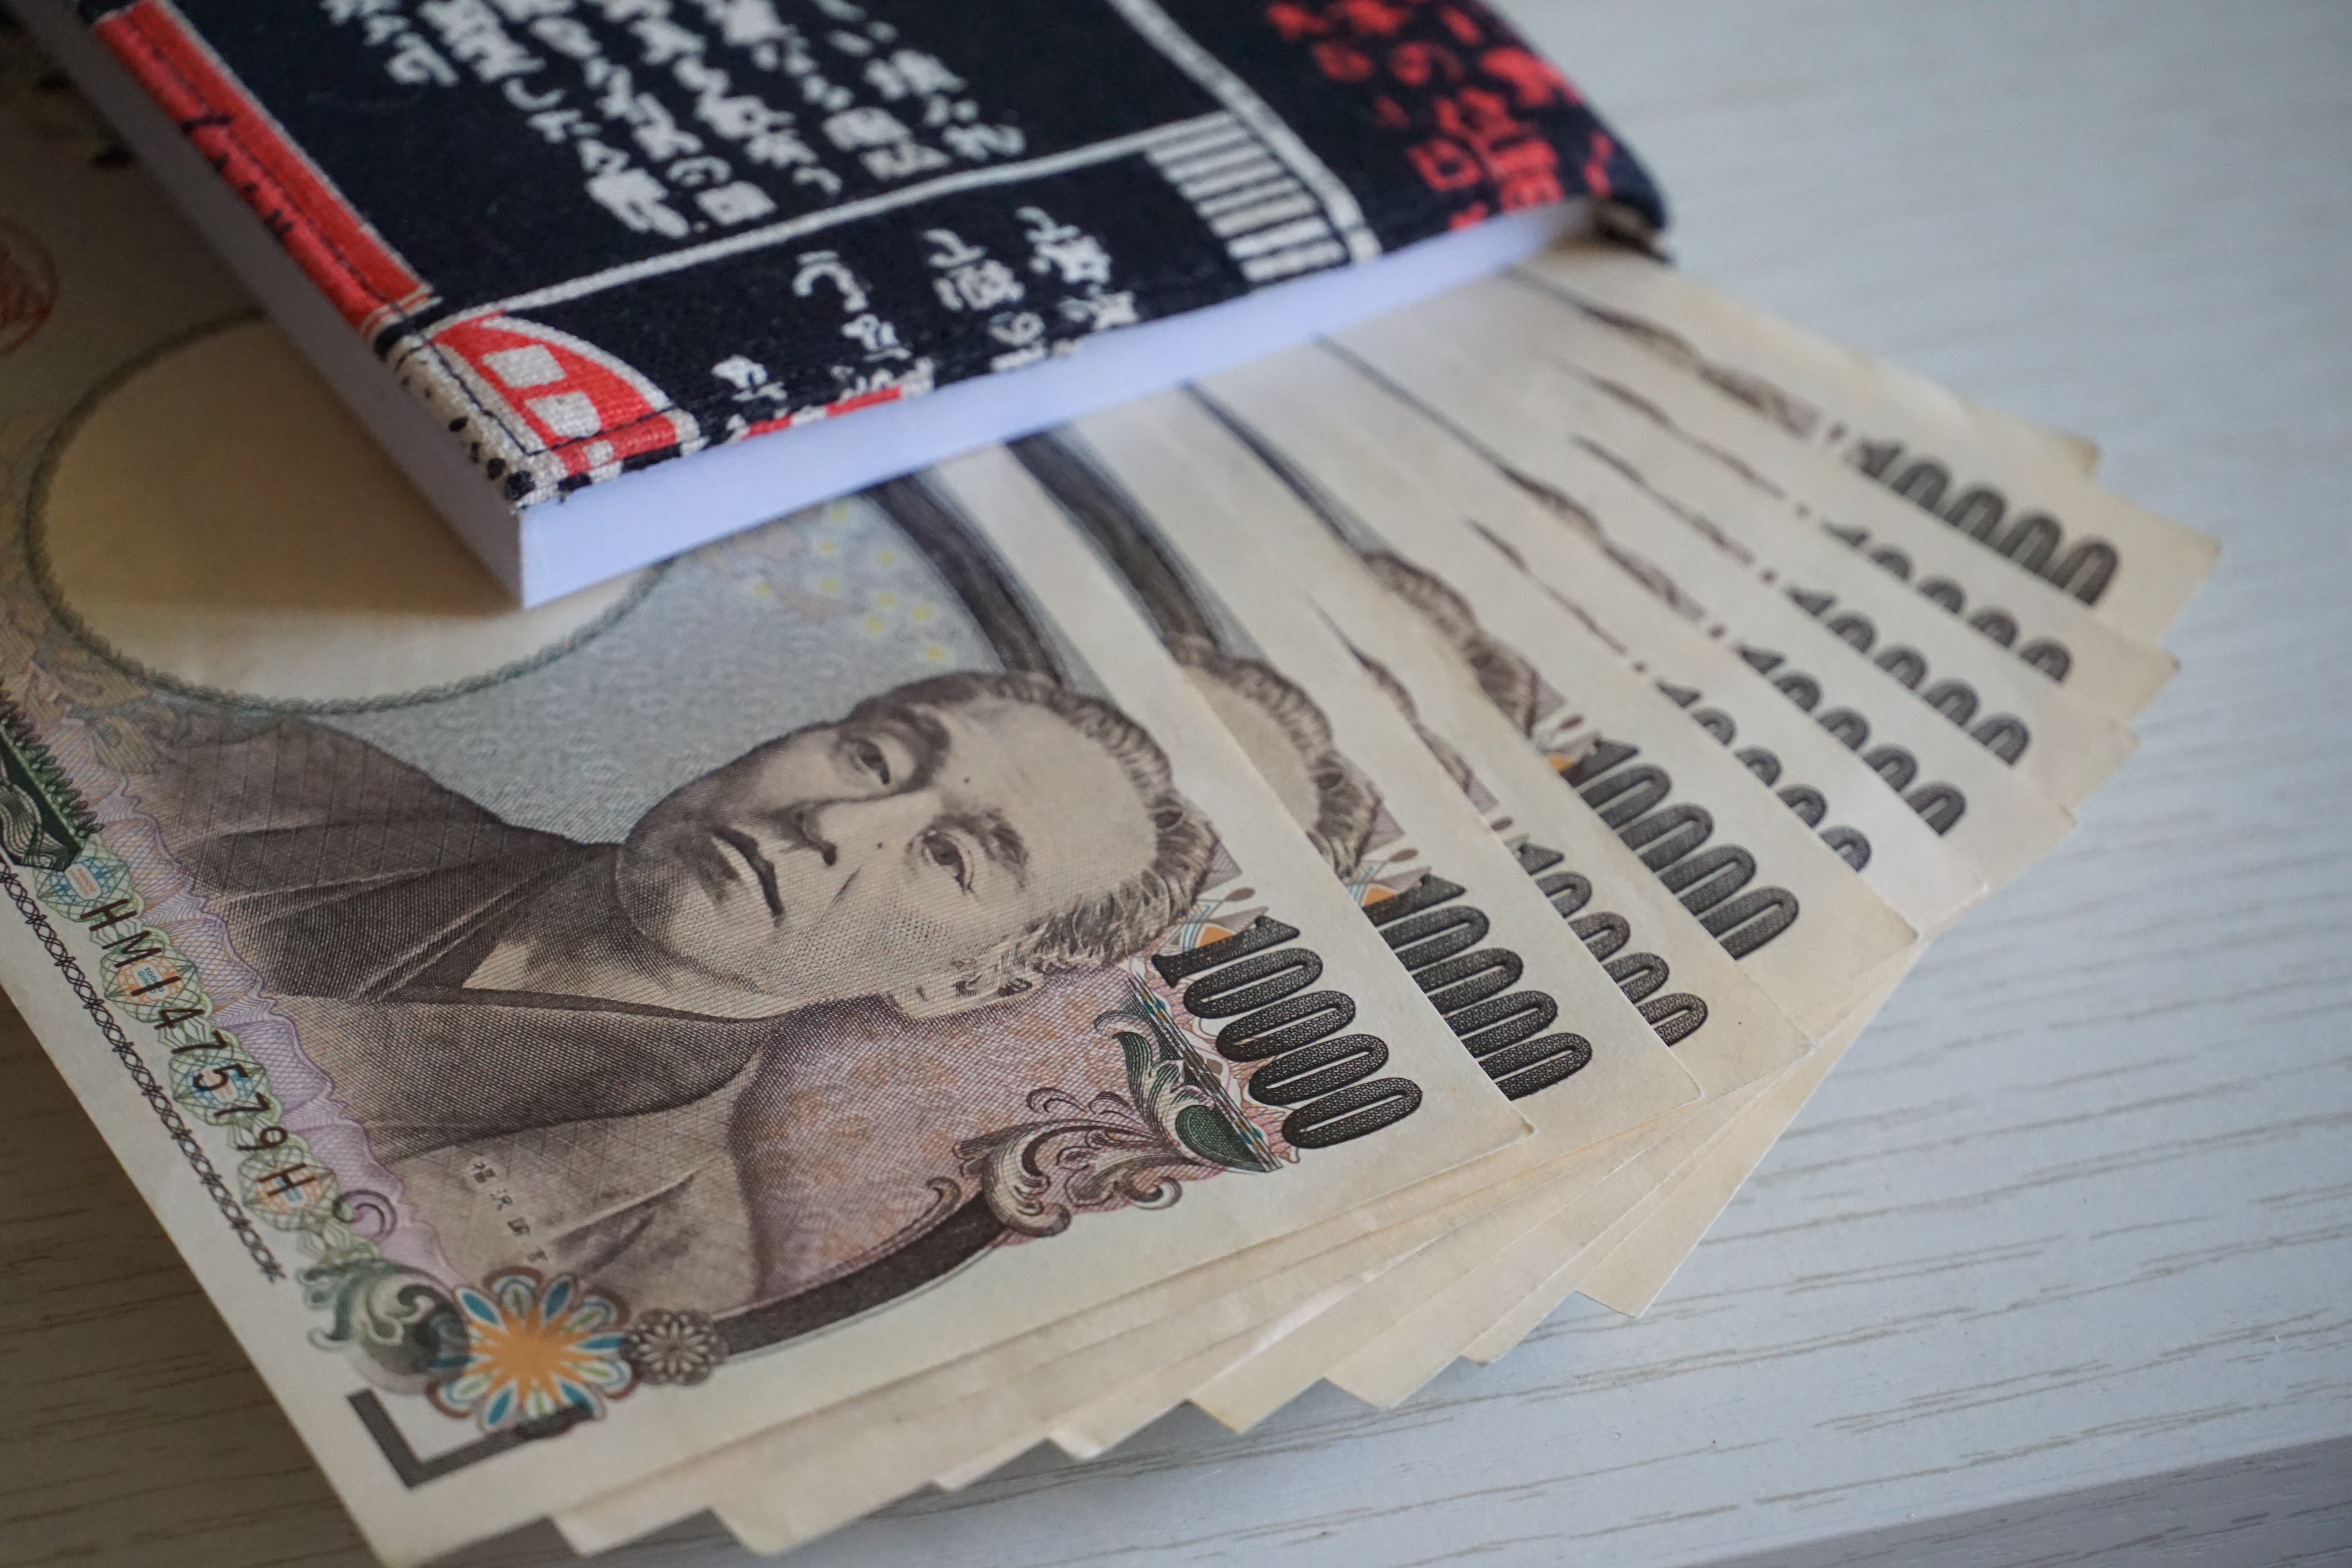 The power of Yen foreign exchange